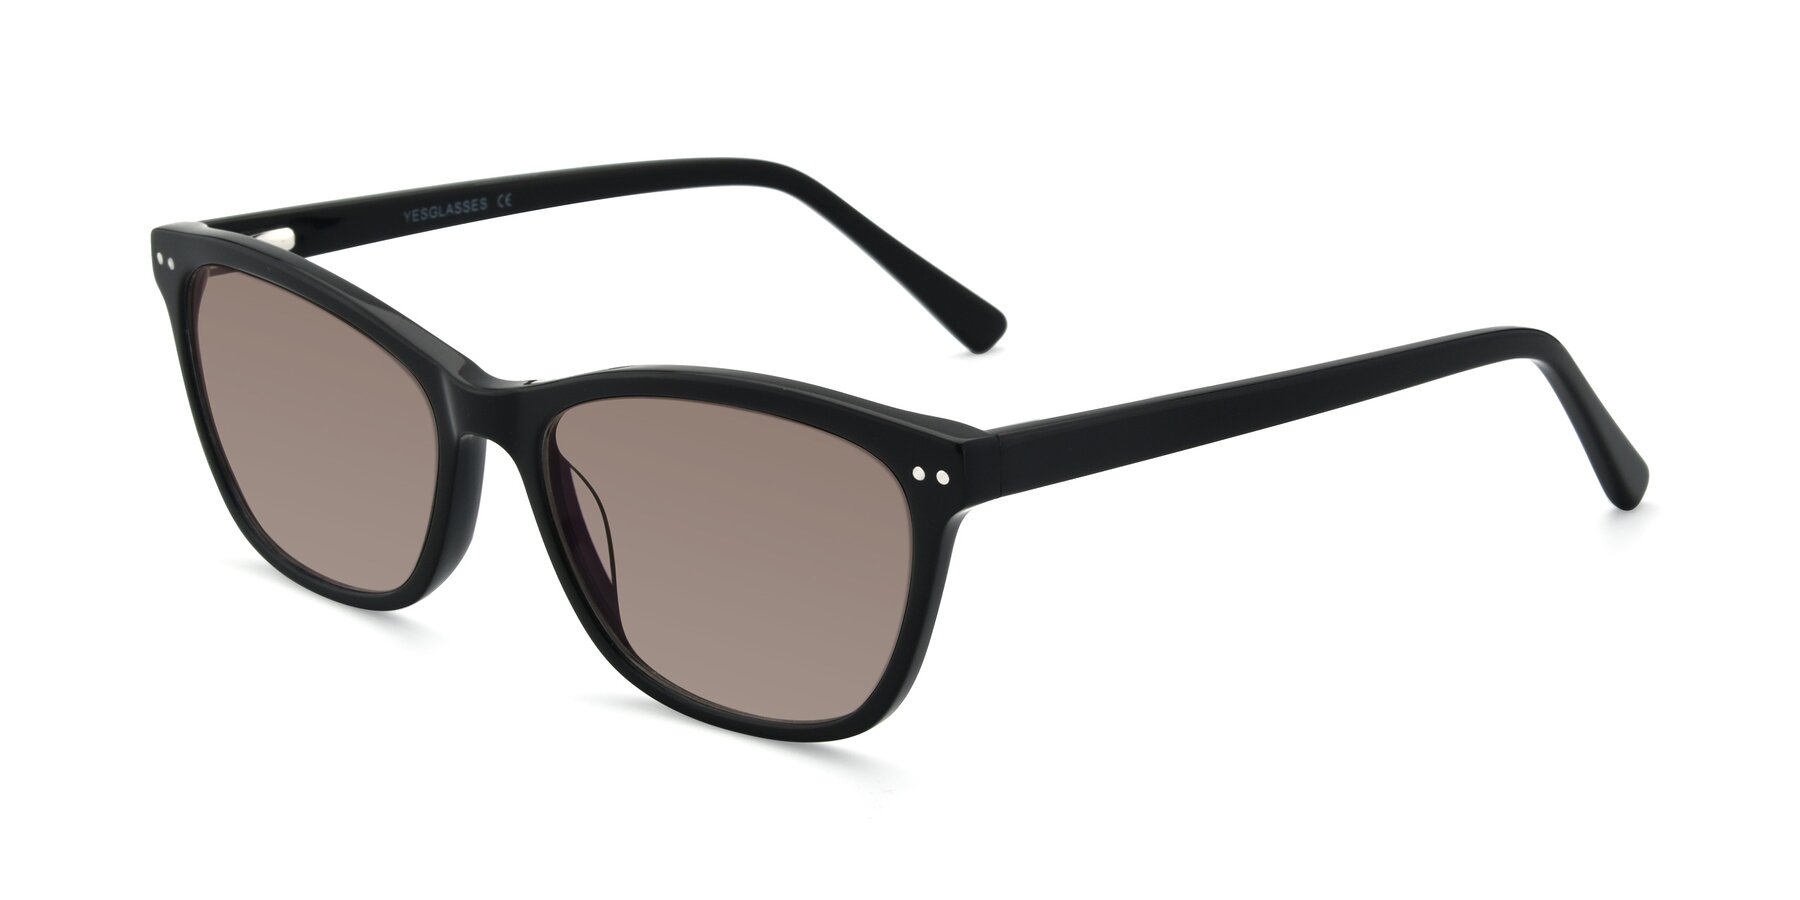 Angle of 17350 in Black with Medium Brown Tinted Lenses